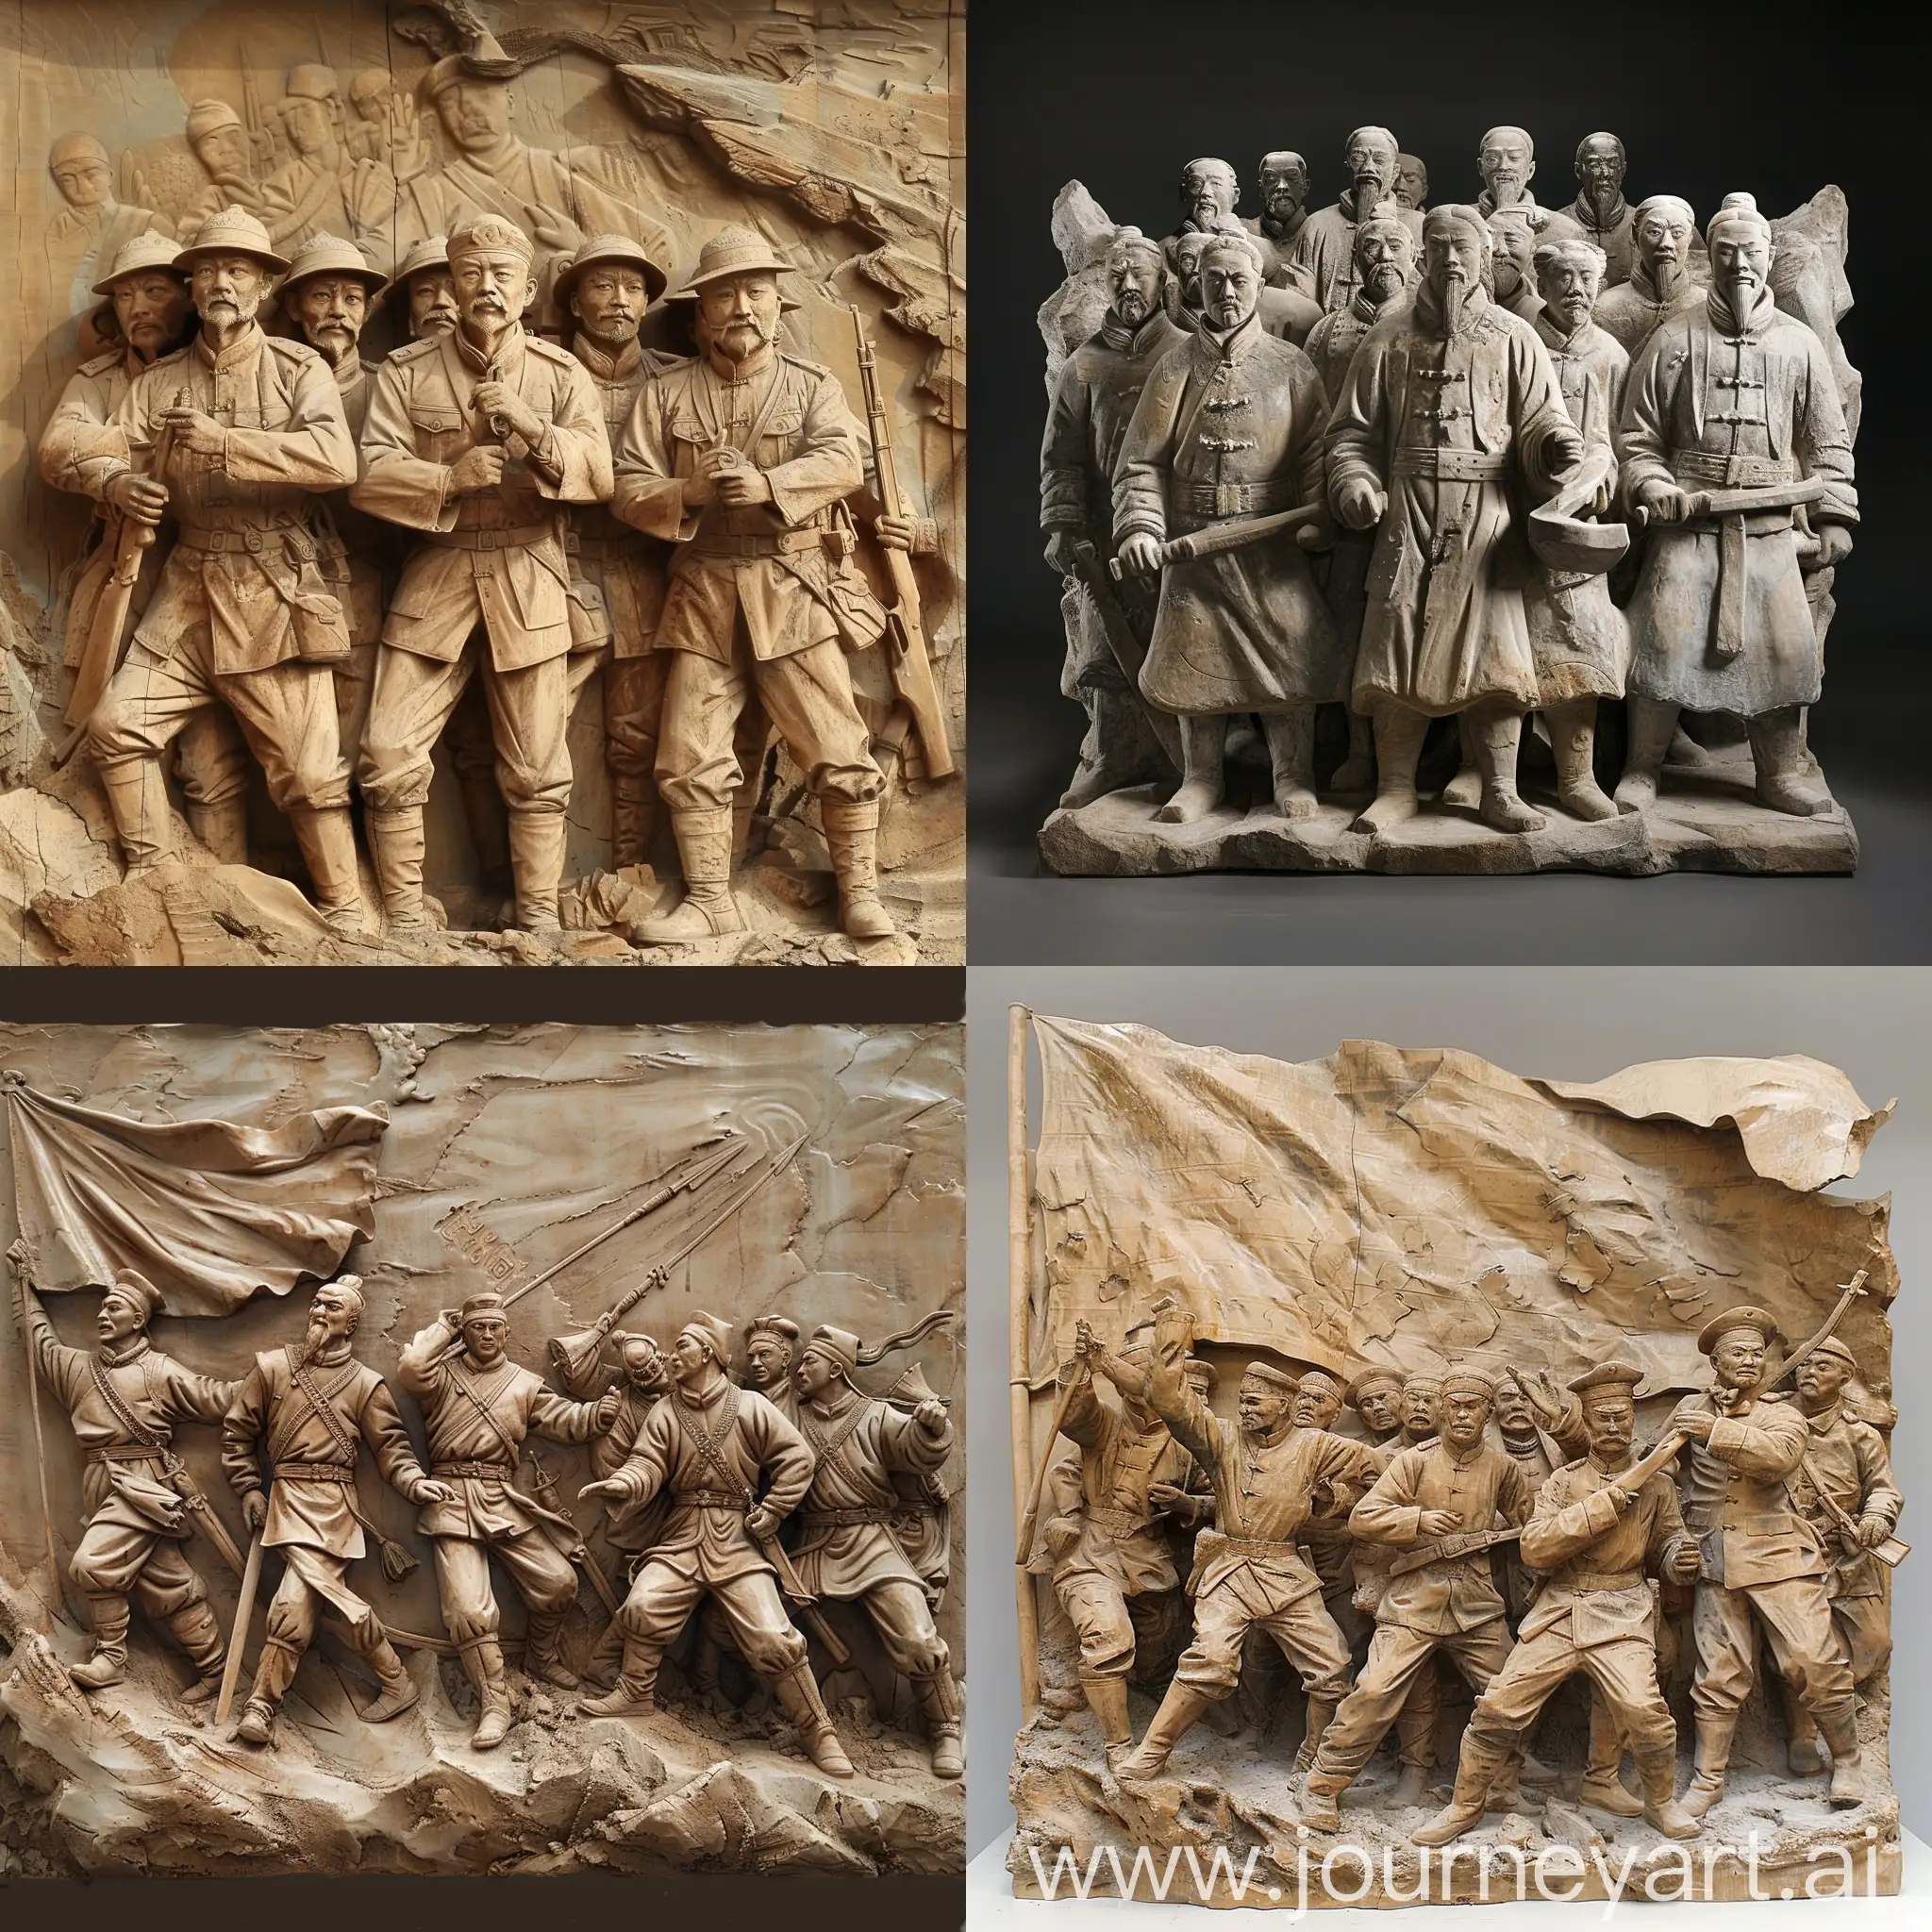 General-Ye-Fei-Leading-the-Charge-Sculpture-Group-from-the-AntiJapanese-Period